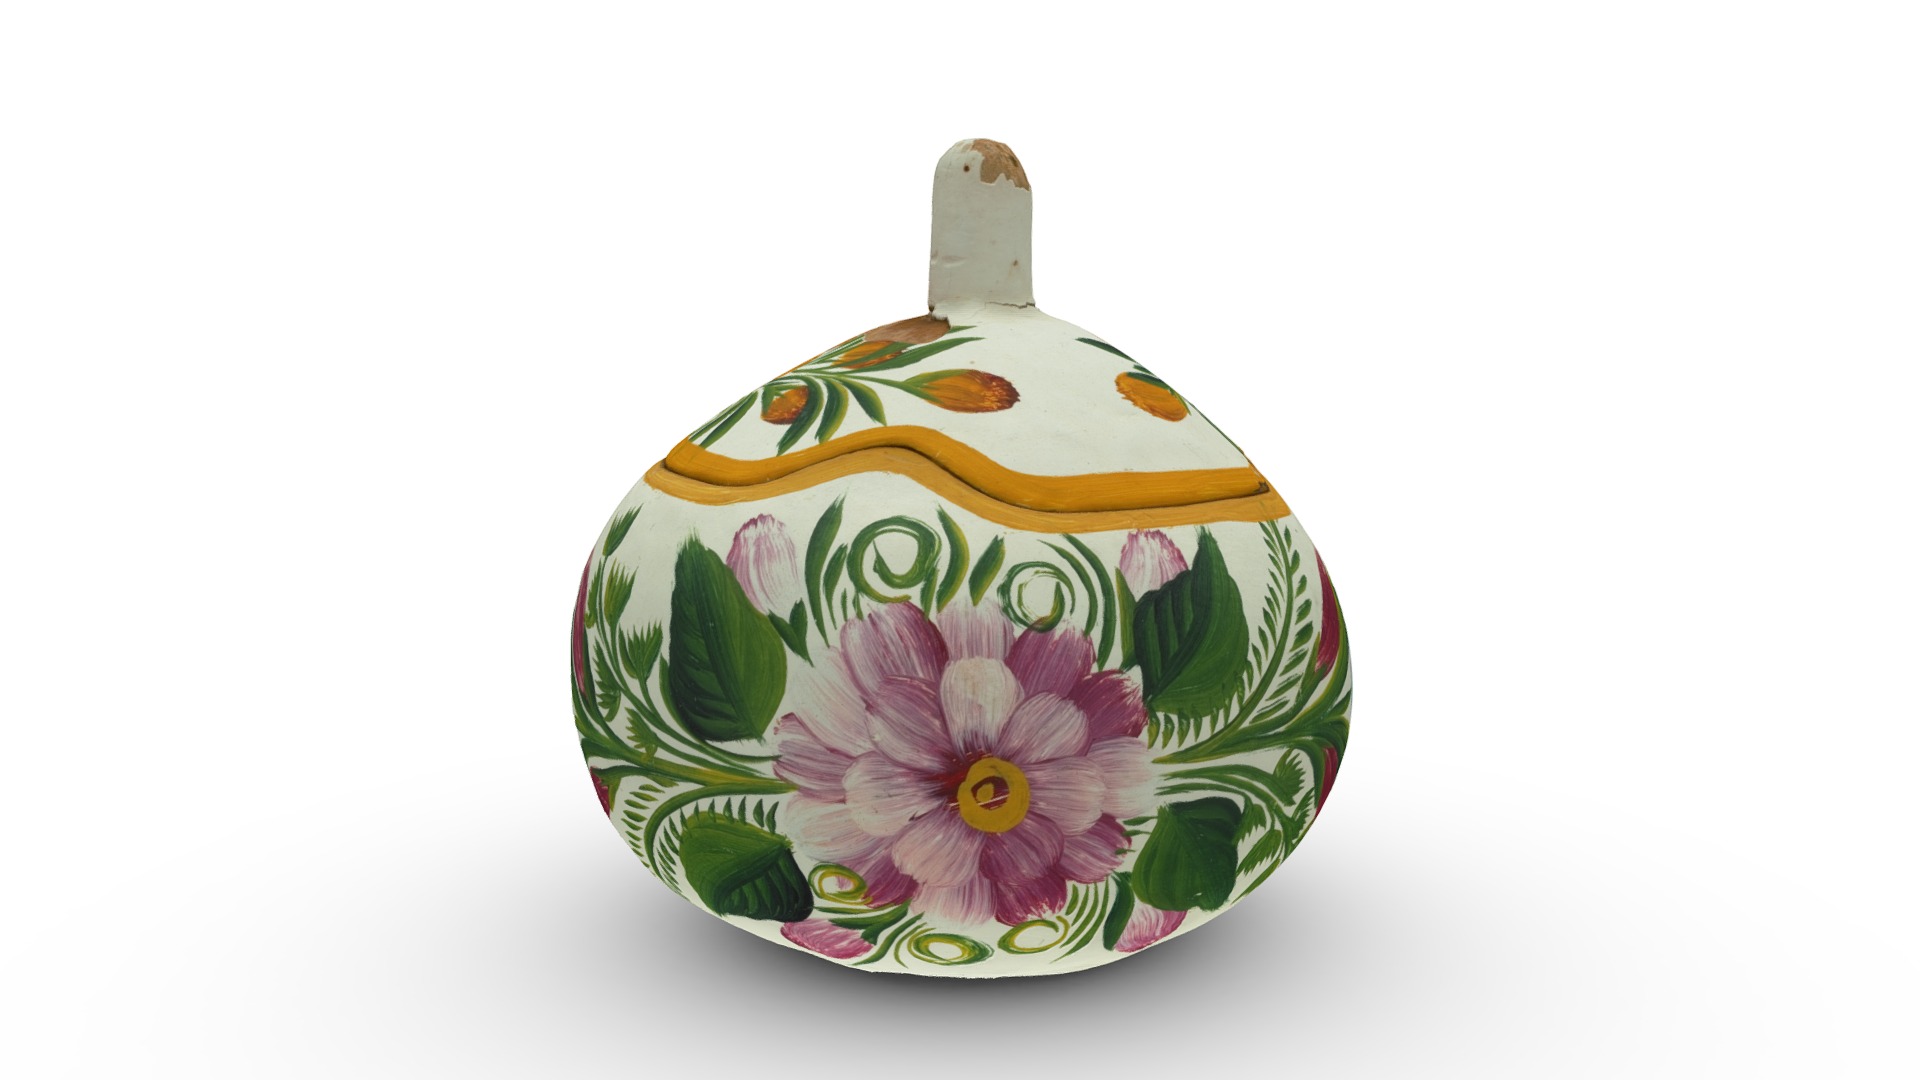 3D model Hand painted souvenir box - This is a 3D model of the Hand painted souvenir box. The 3D model is about a green and white egg with a flower design on it.